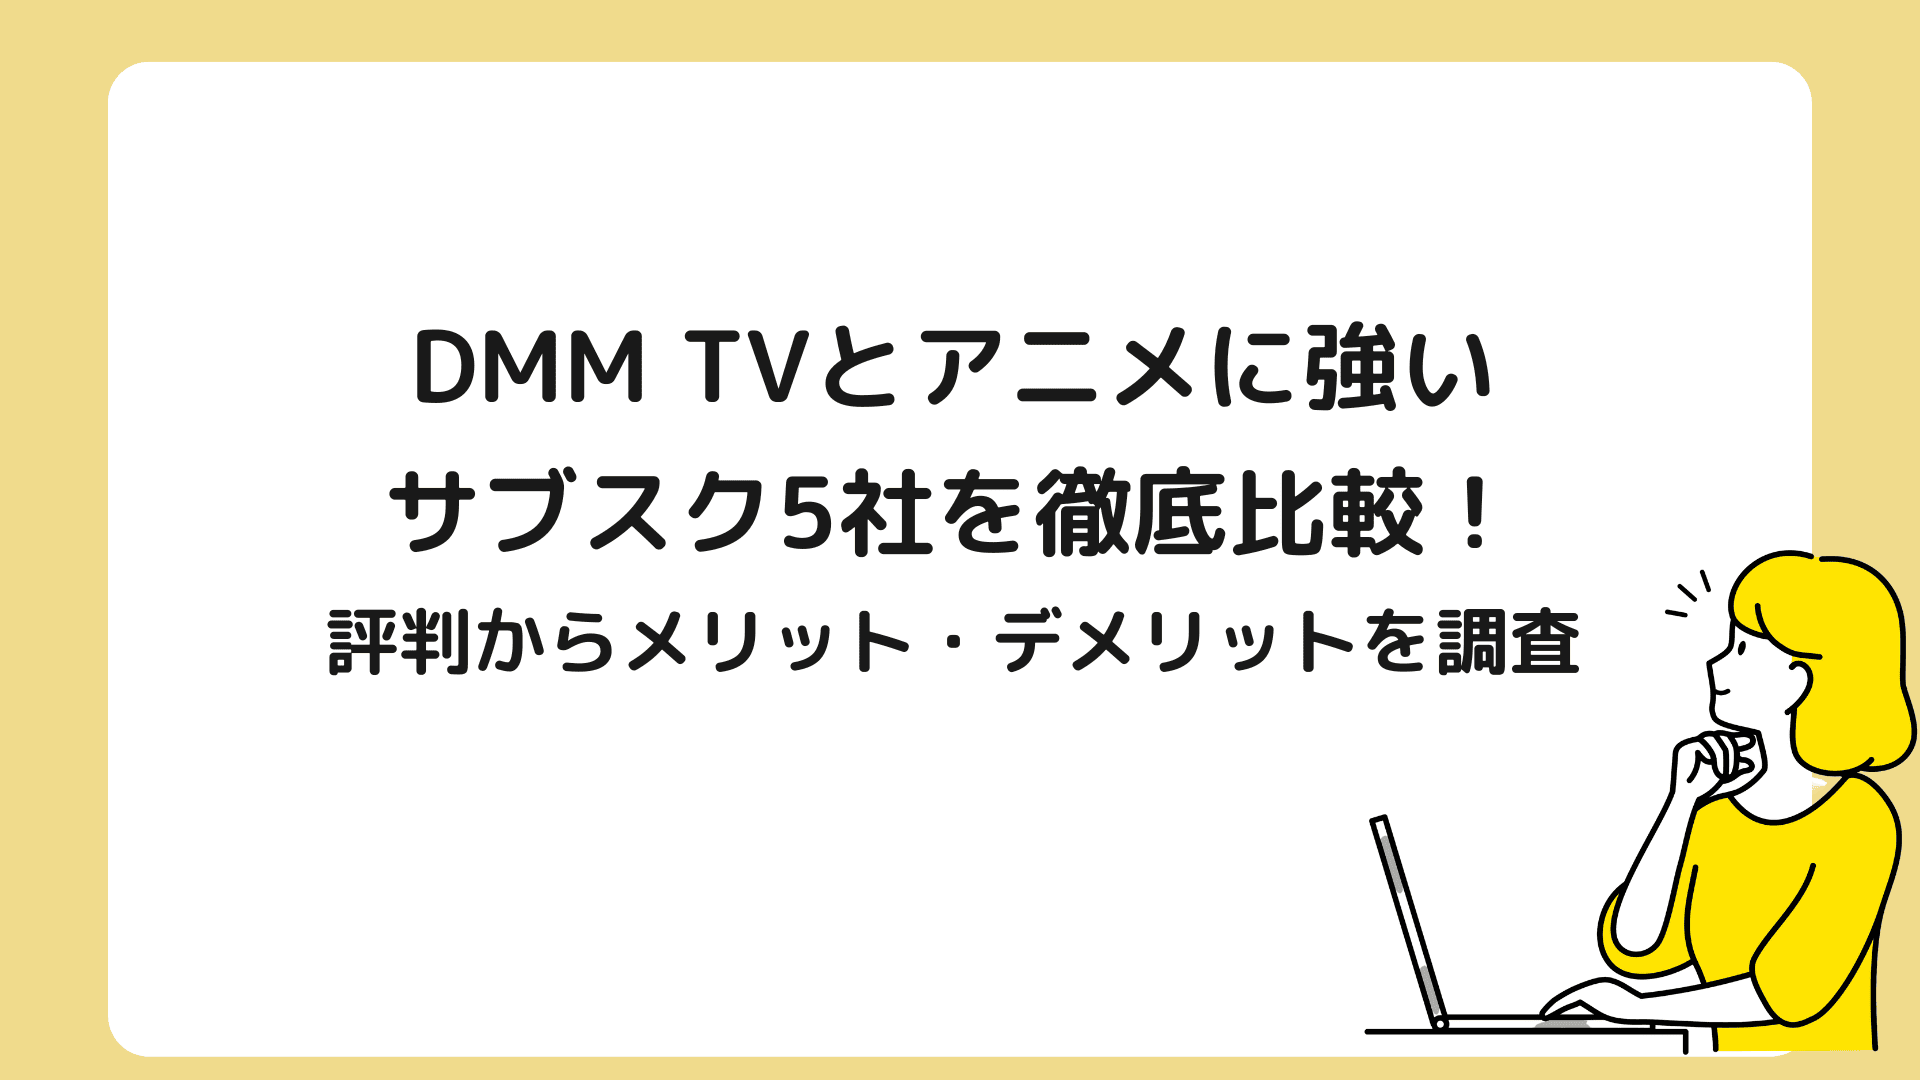 dmm tv anime a streaming service　 compare